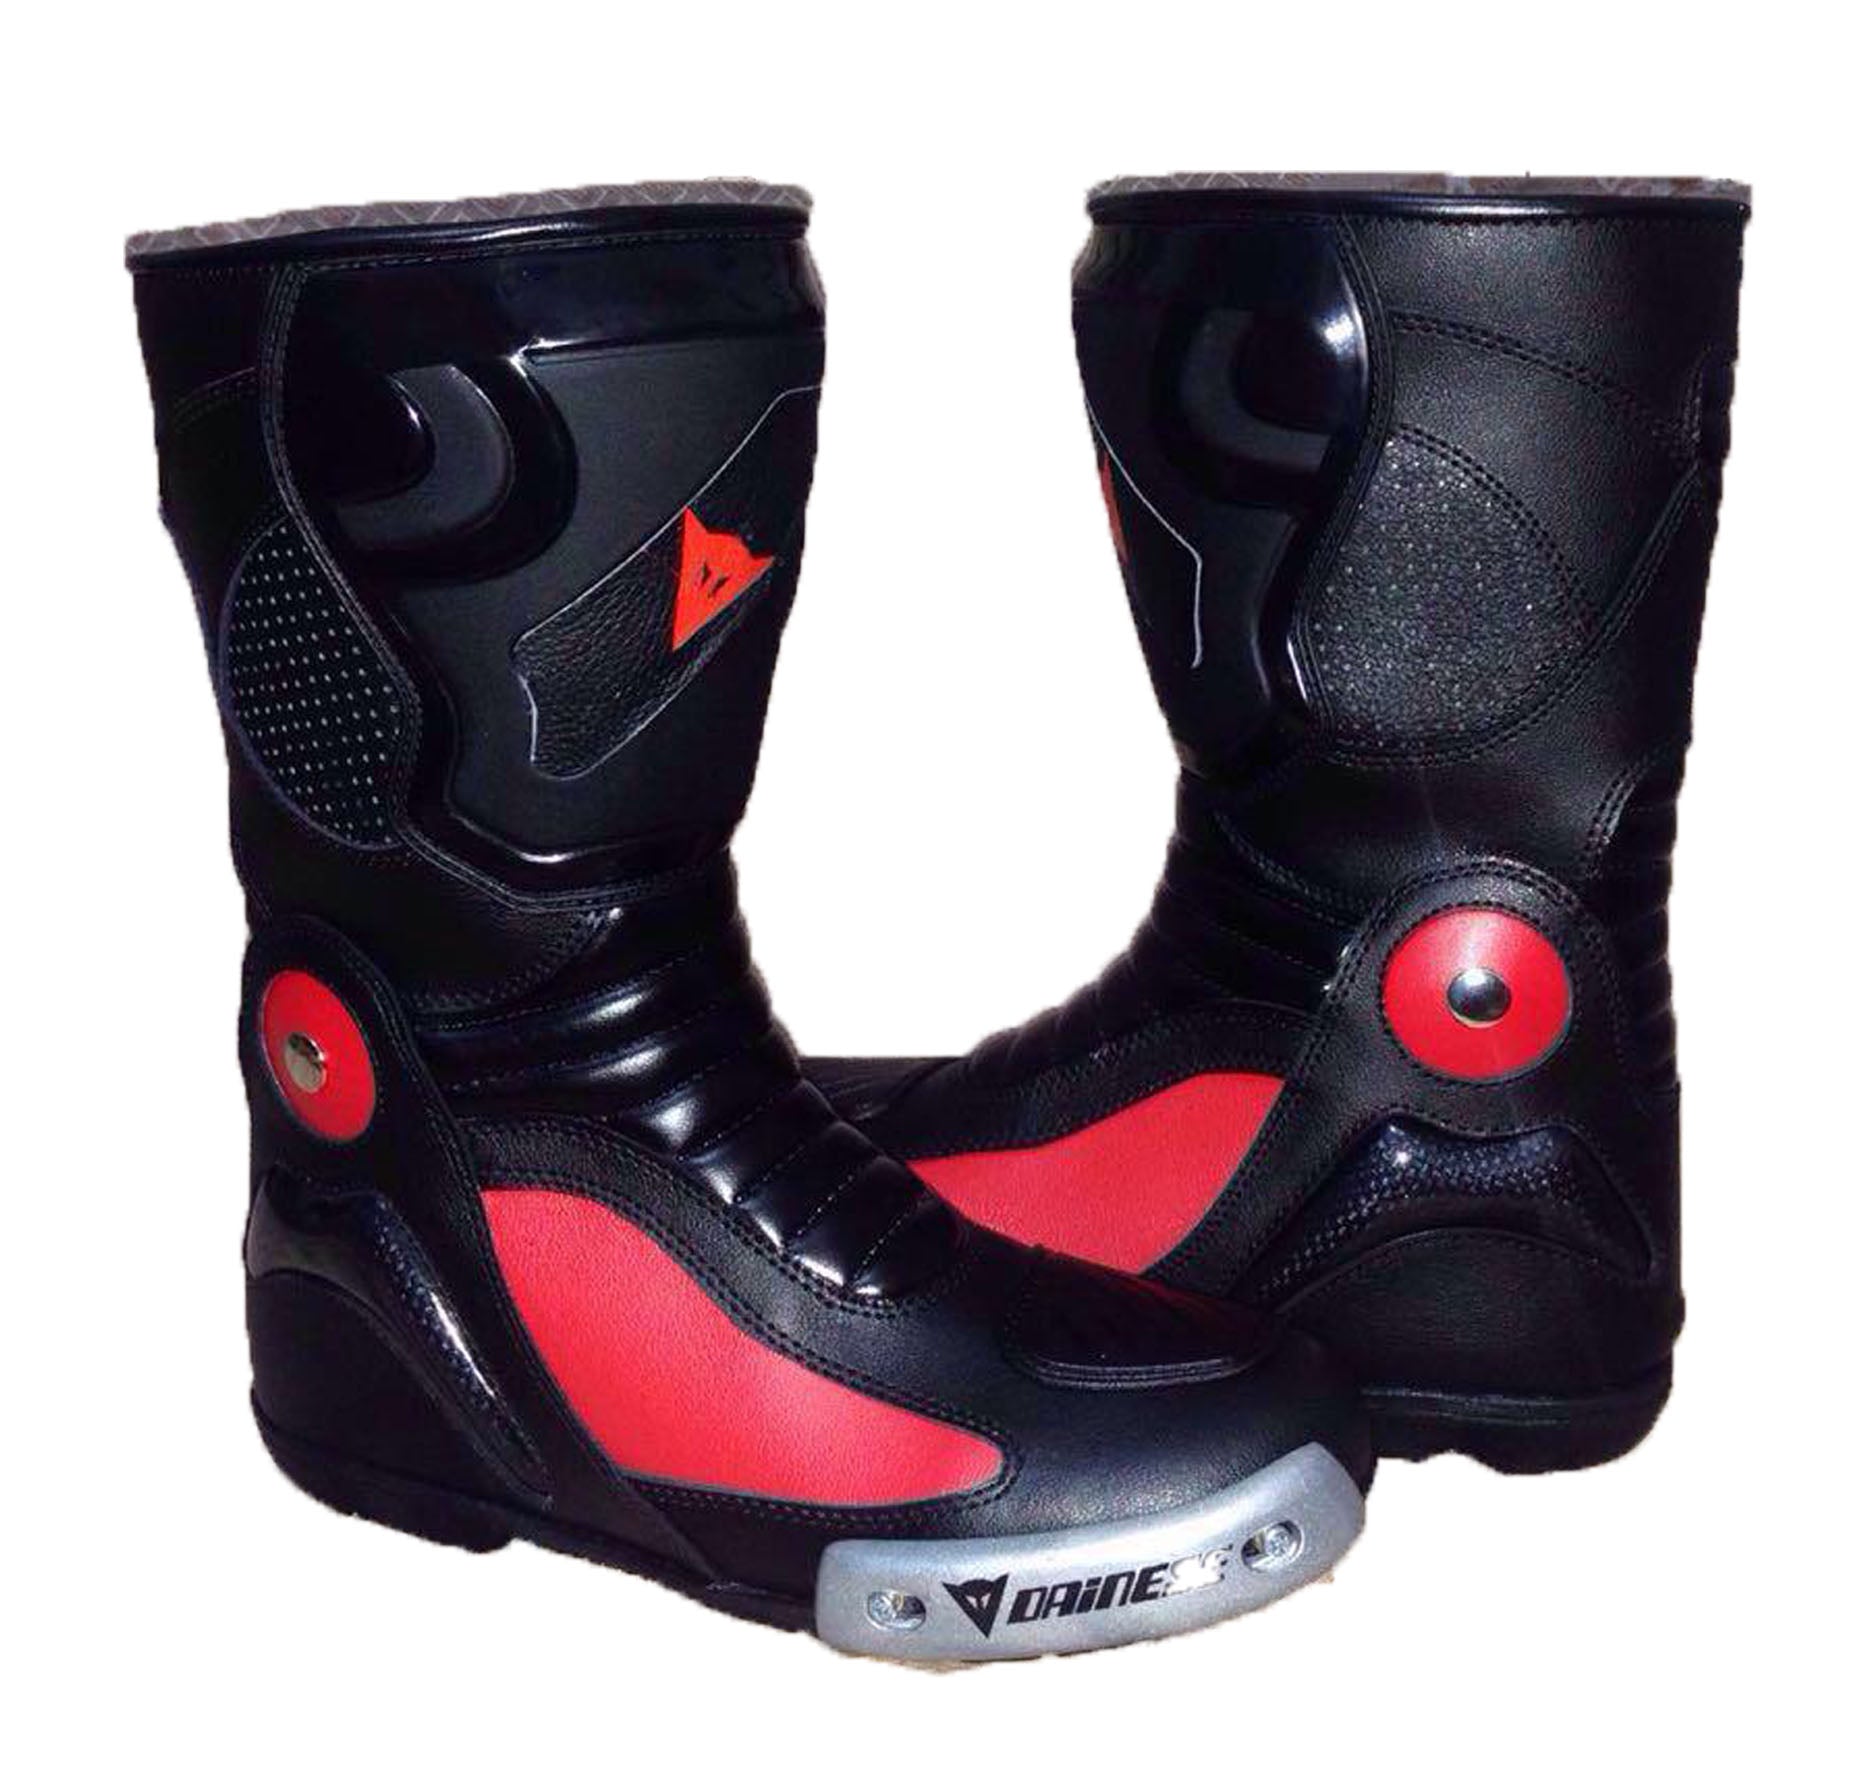 Mens Leather Long Black & Red CE Motorbike Motorcycle Racing Sports Shoes Boots-017